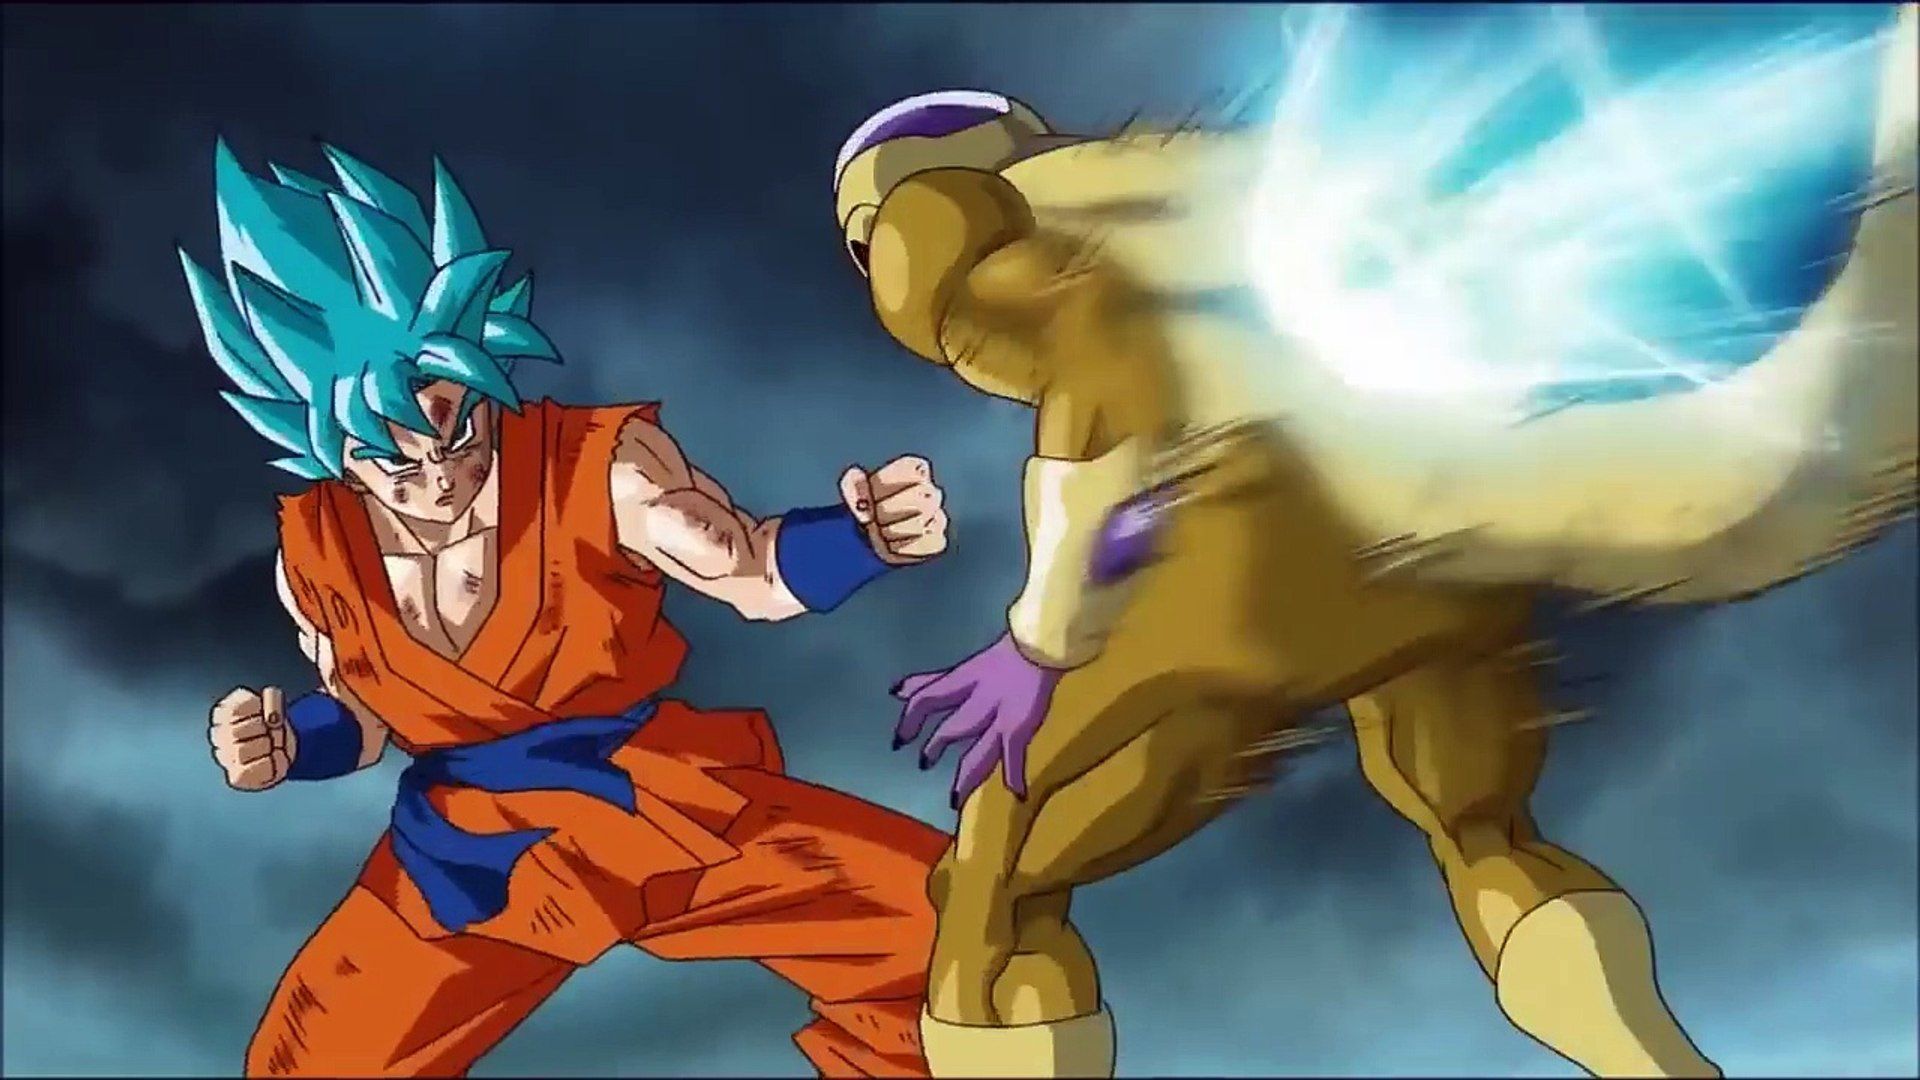 The Golden Frieza fight is an extremely interesting one from Dragon Ball Super (Image via Toei Animation)